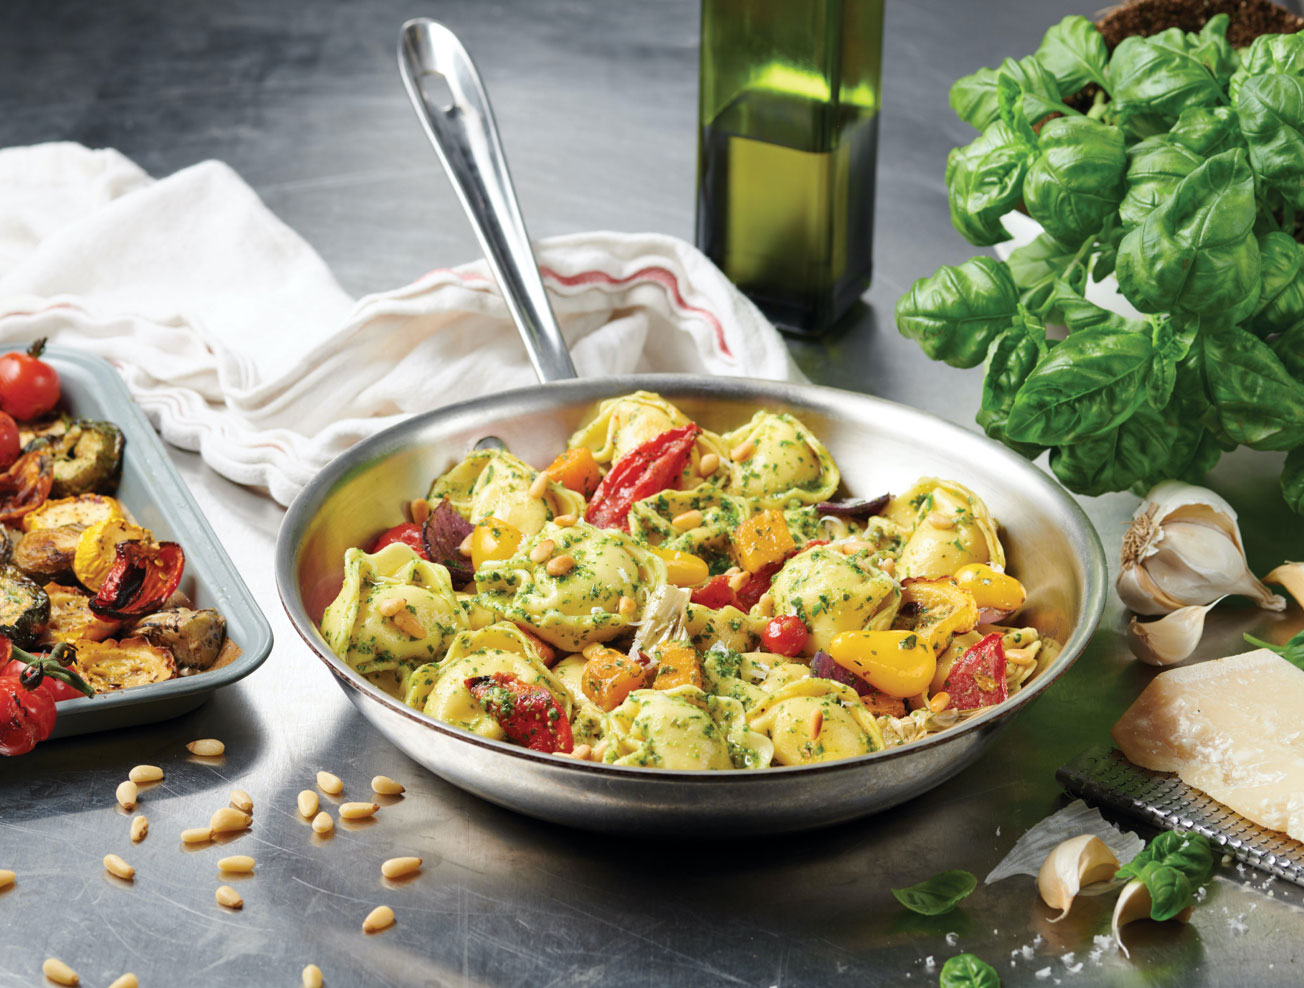 A sauté pan with Tortelloni, pesto, tomatoes and pine nuts